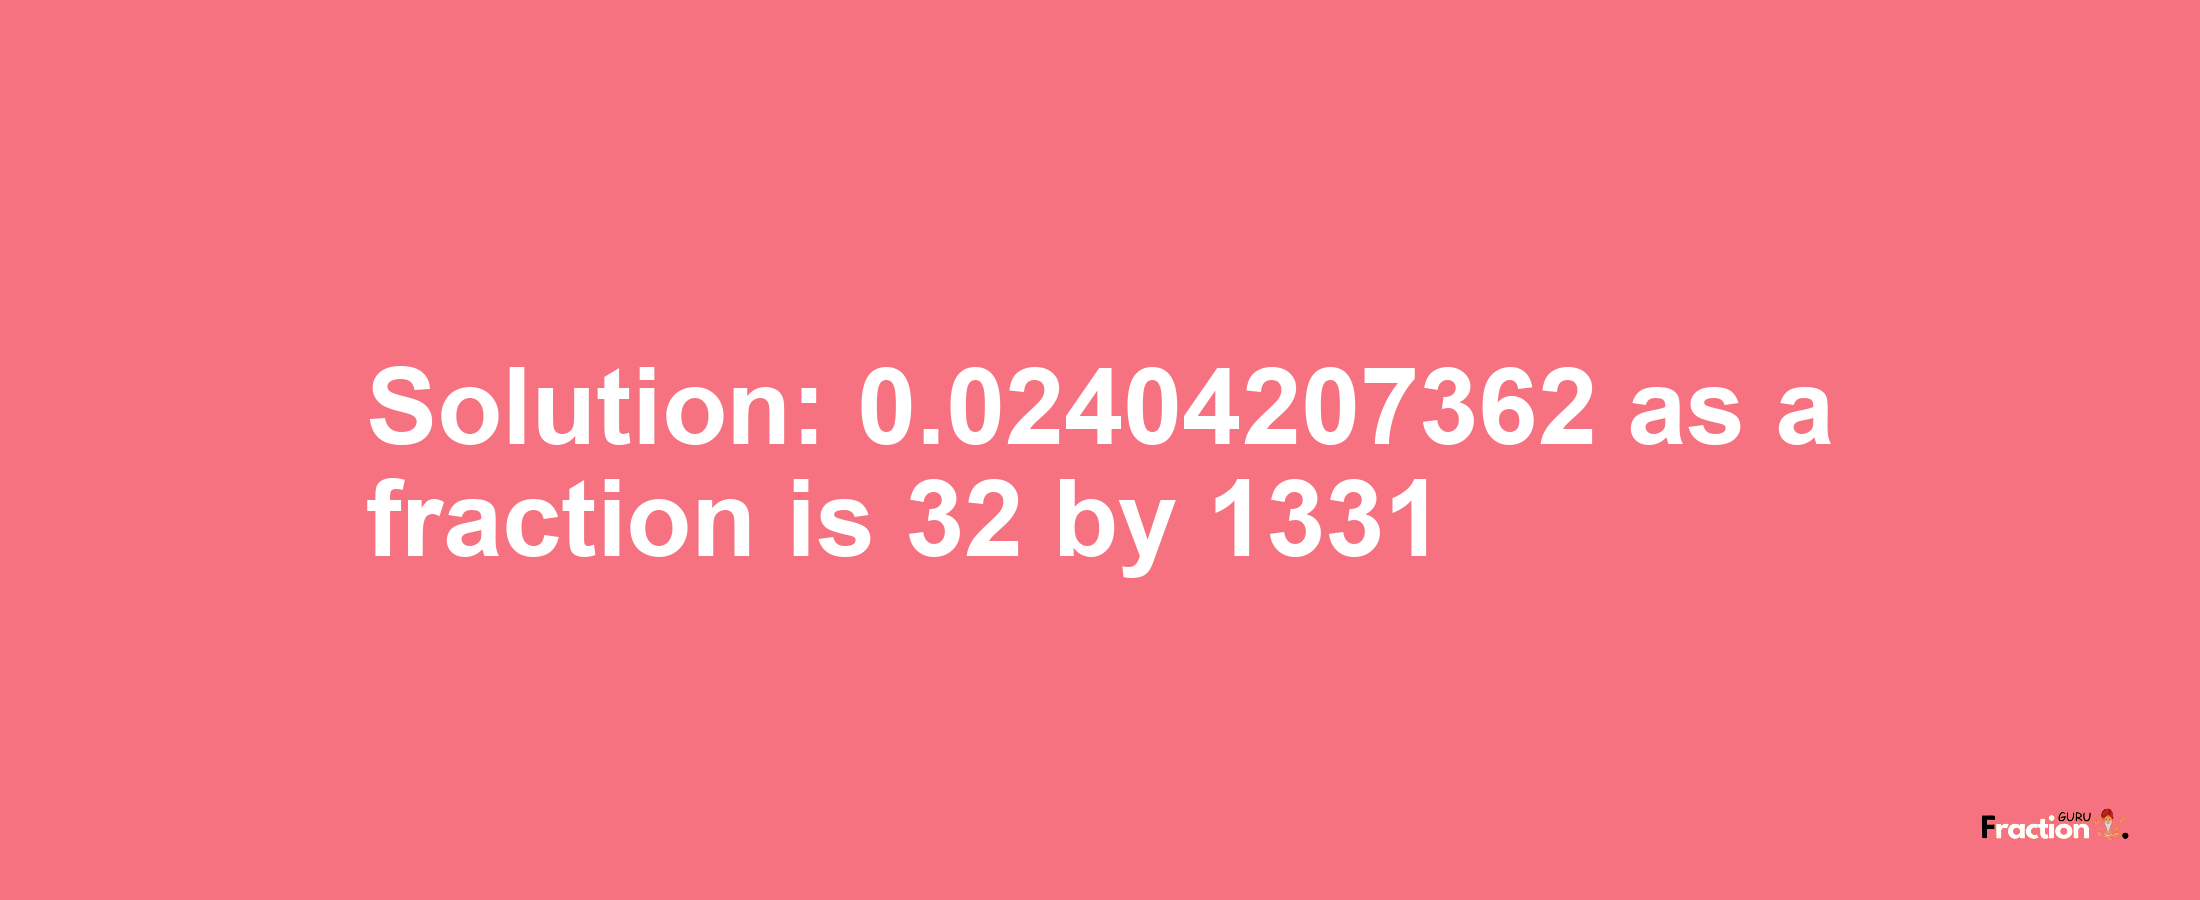 Solution:0.02404207362 as a fraction is 32/1331